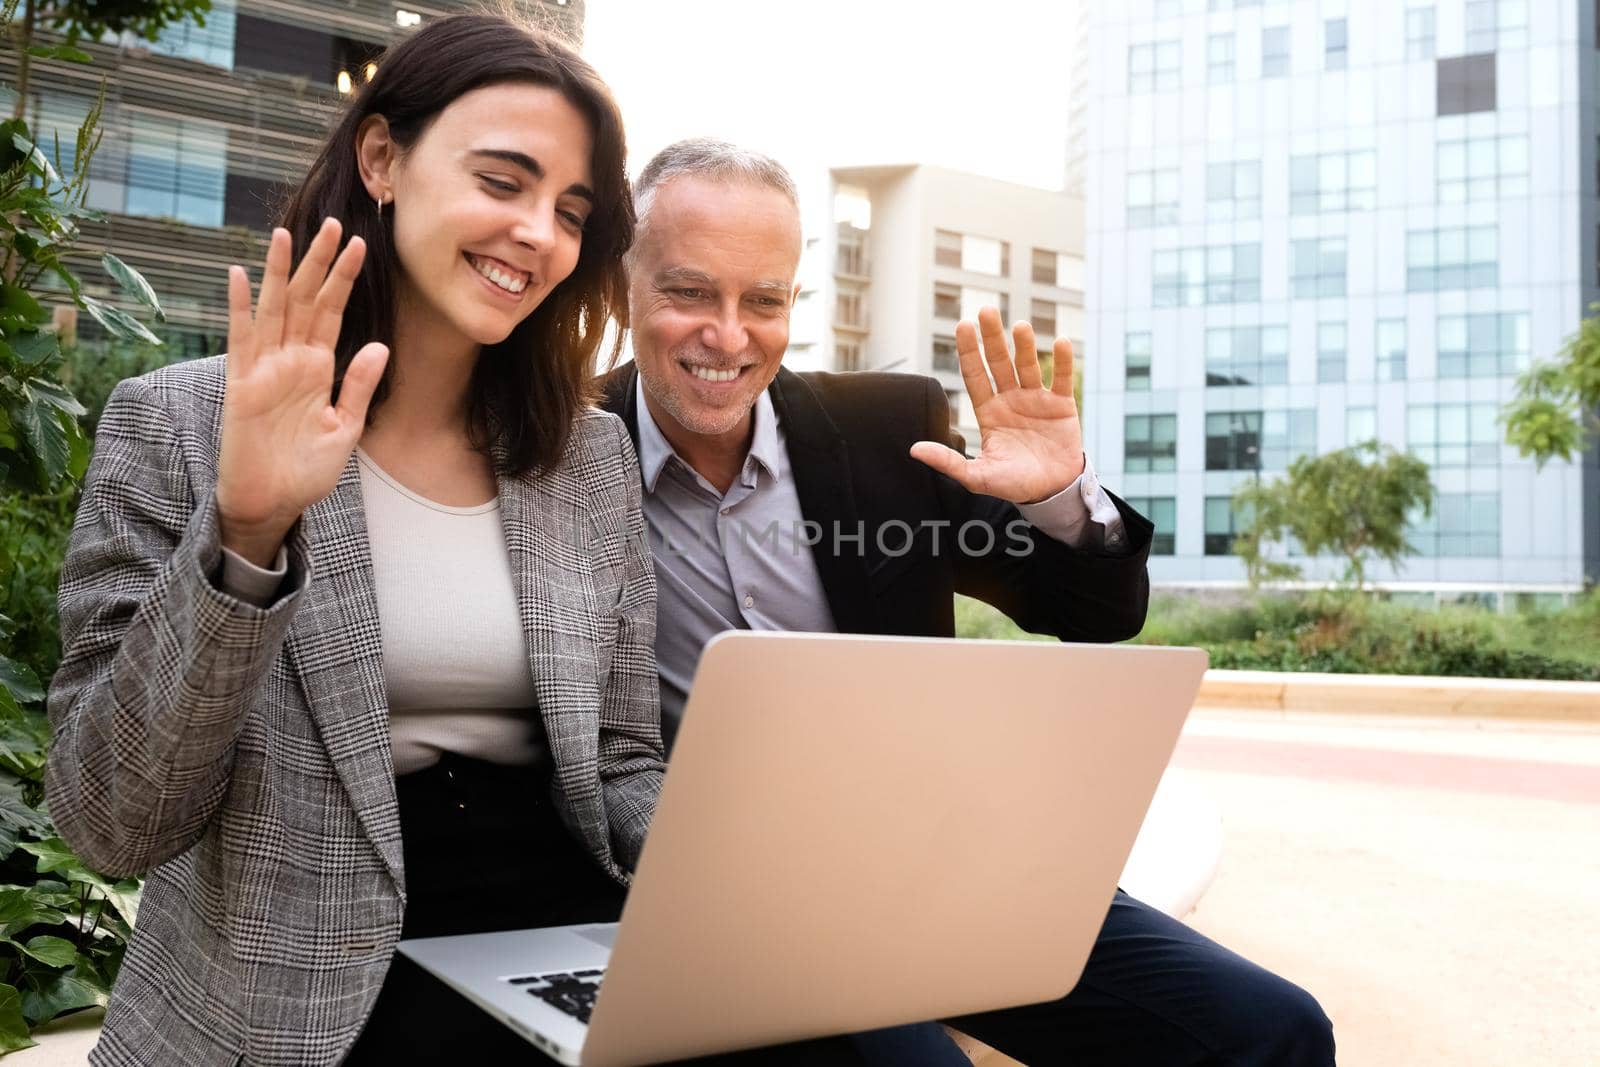 Young woman and caucasian man wave hello on business video call sitting on a bench outside office buildings. Copy space. Technology concept.